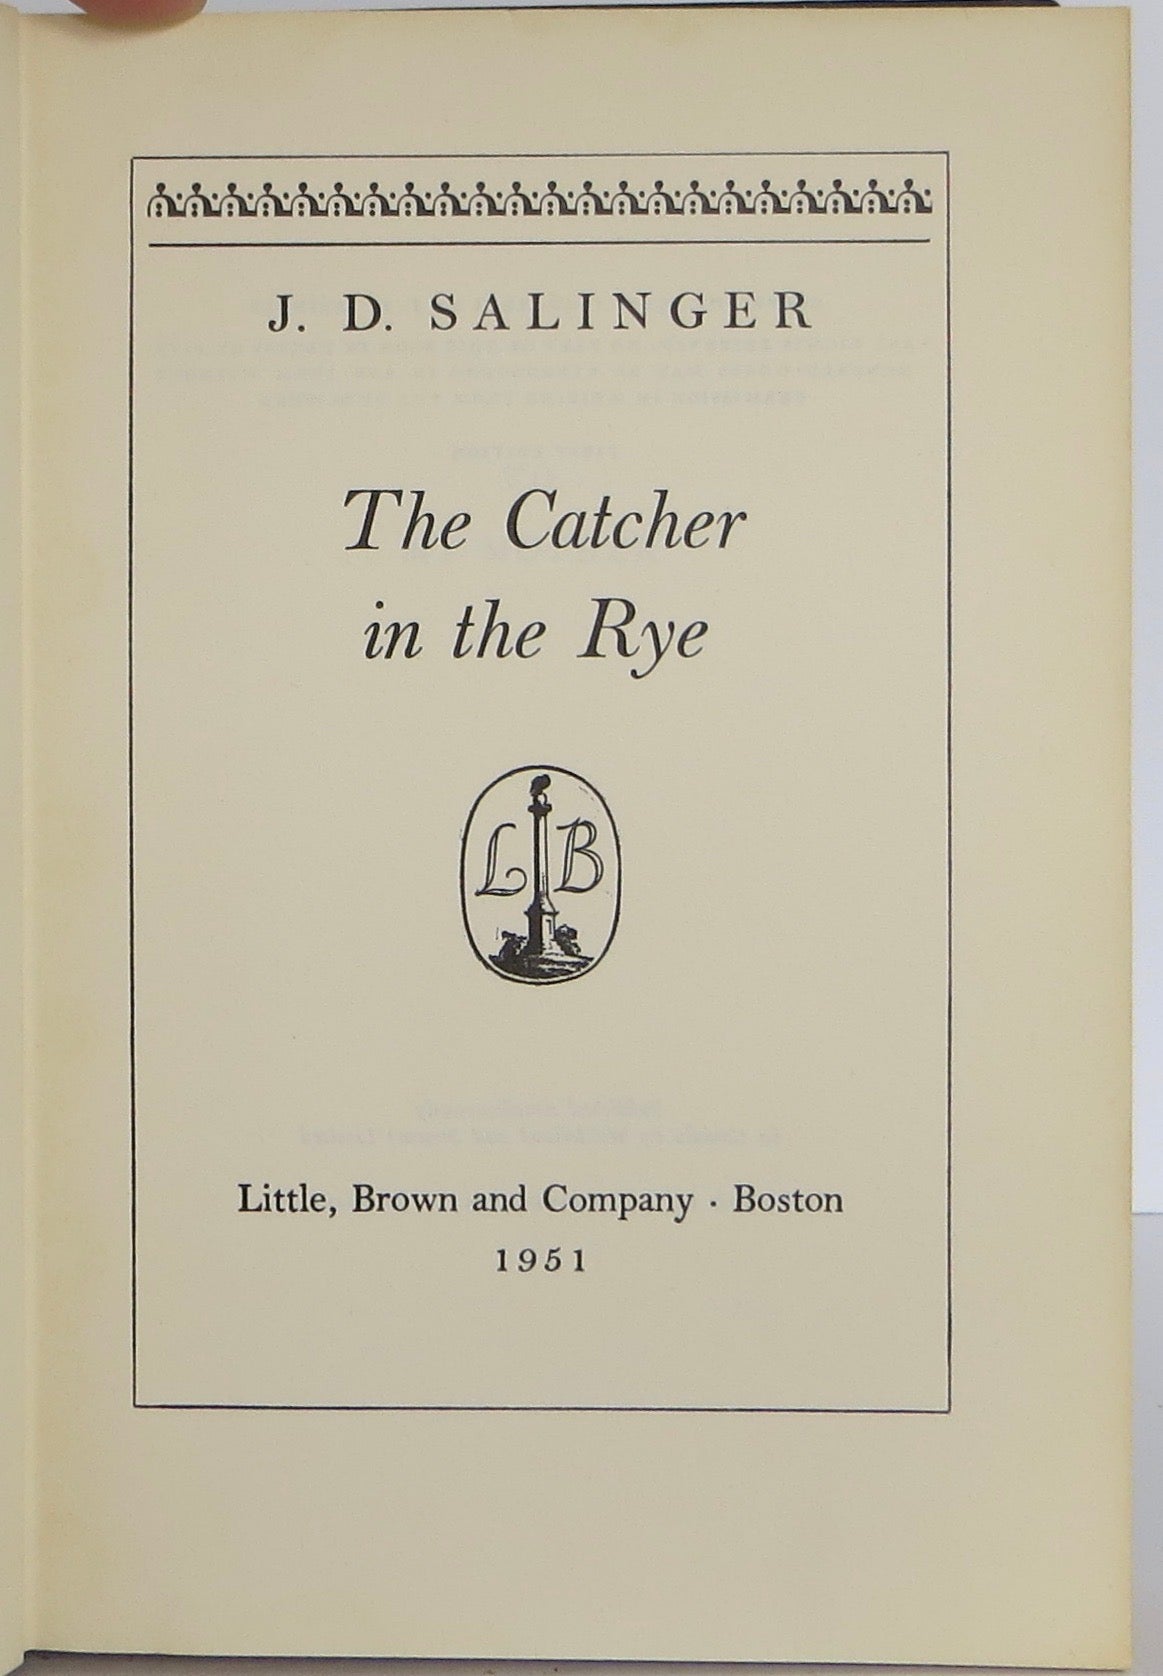 The Catcher in the Rye - The First Edition Rare Books